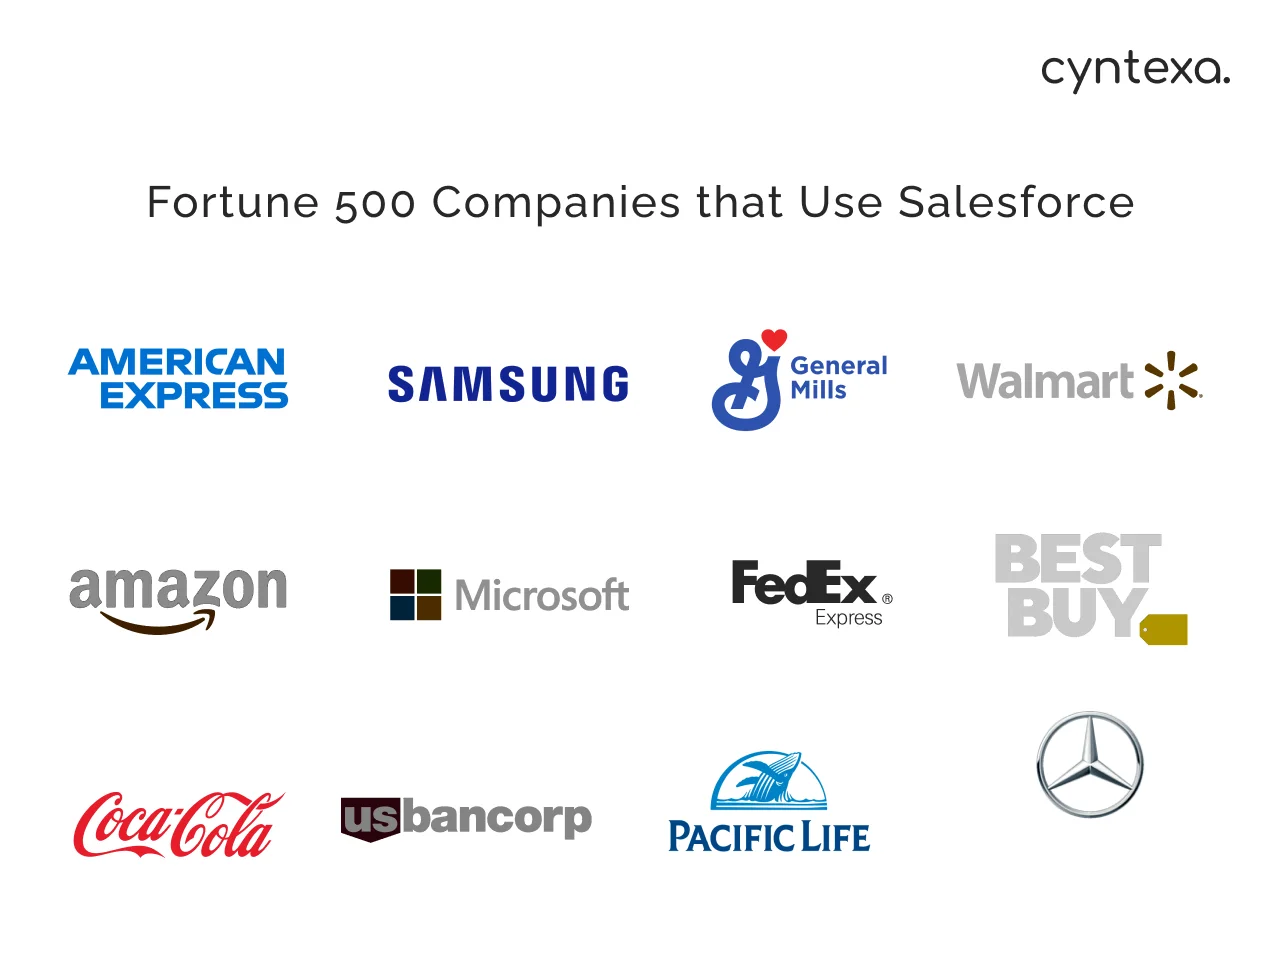 Fortune 500 companies that use salesforce